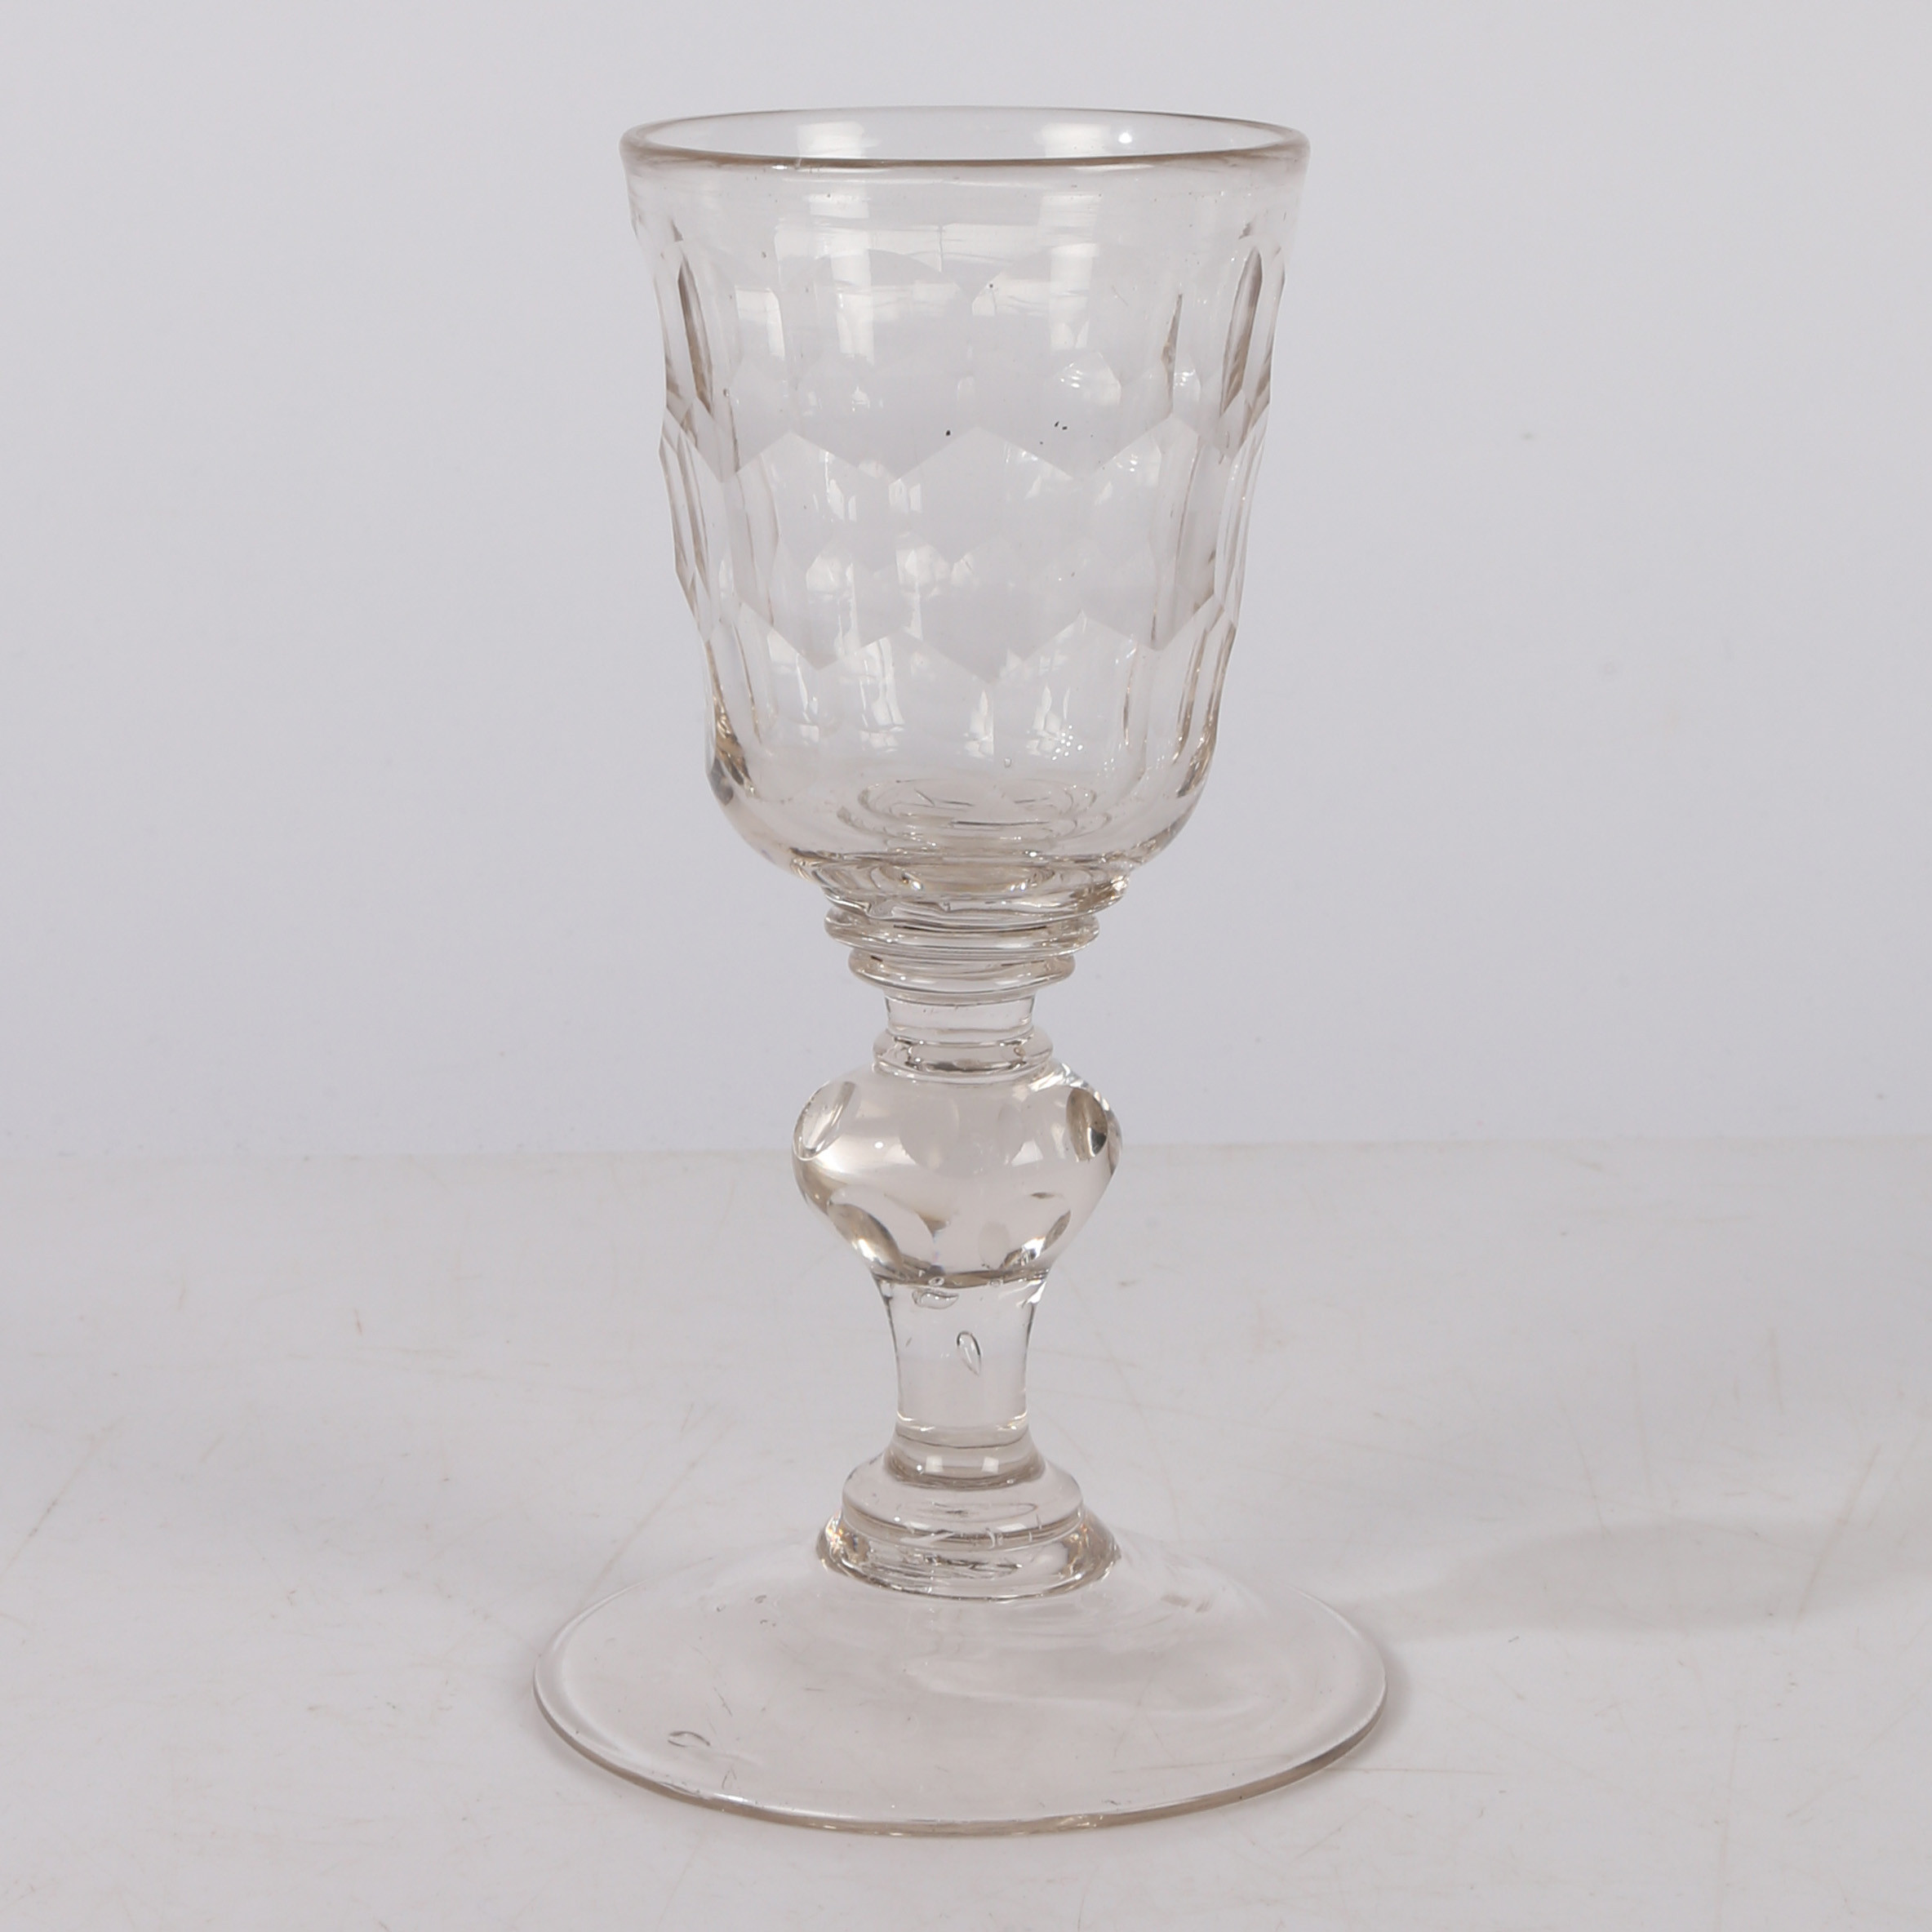 AN EARLY TO MID 18TH CENTURY BOHEMIAN GOBLET.